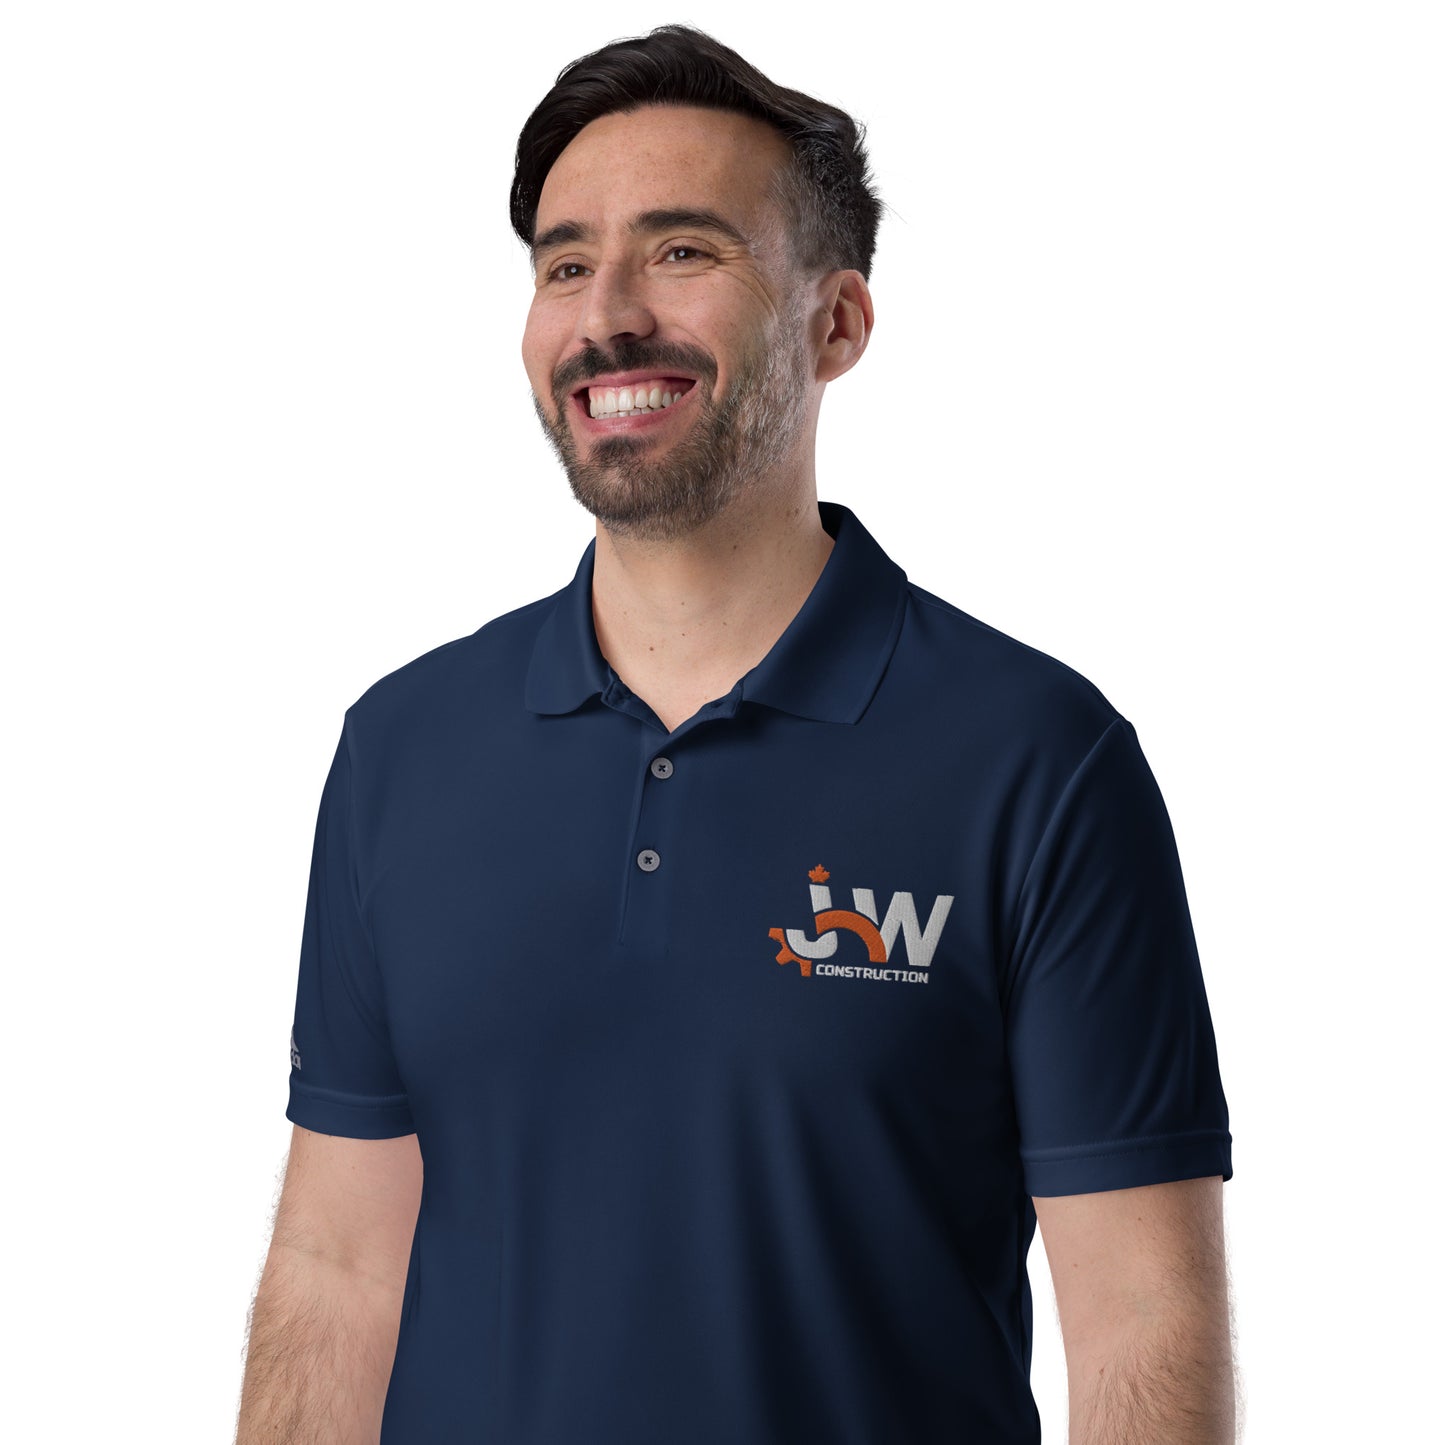 JHW polo shirt with Embroidery